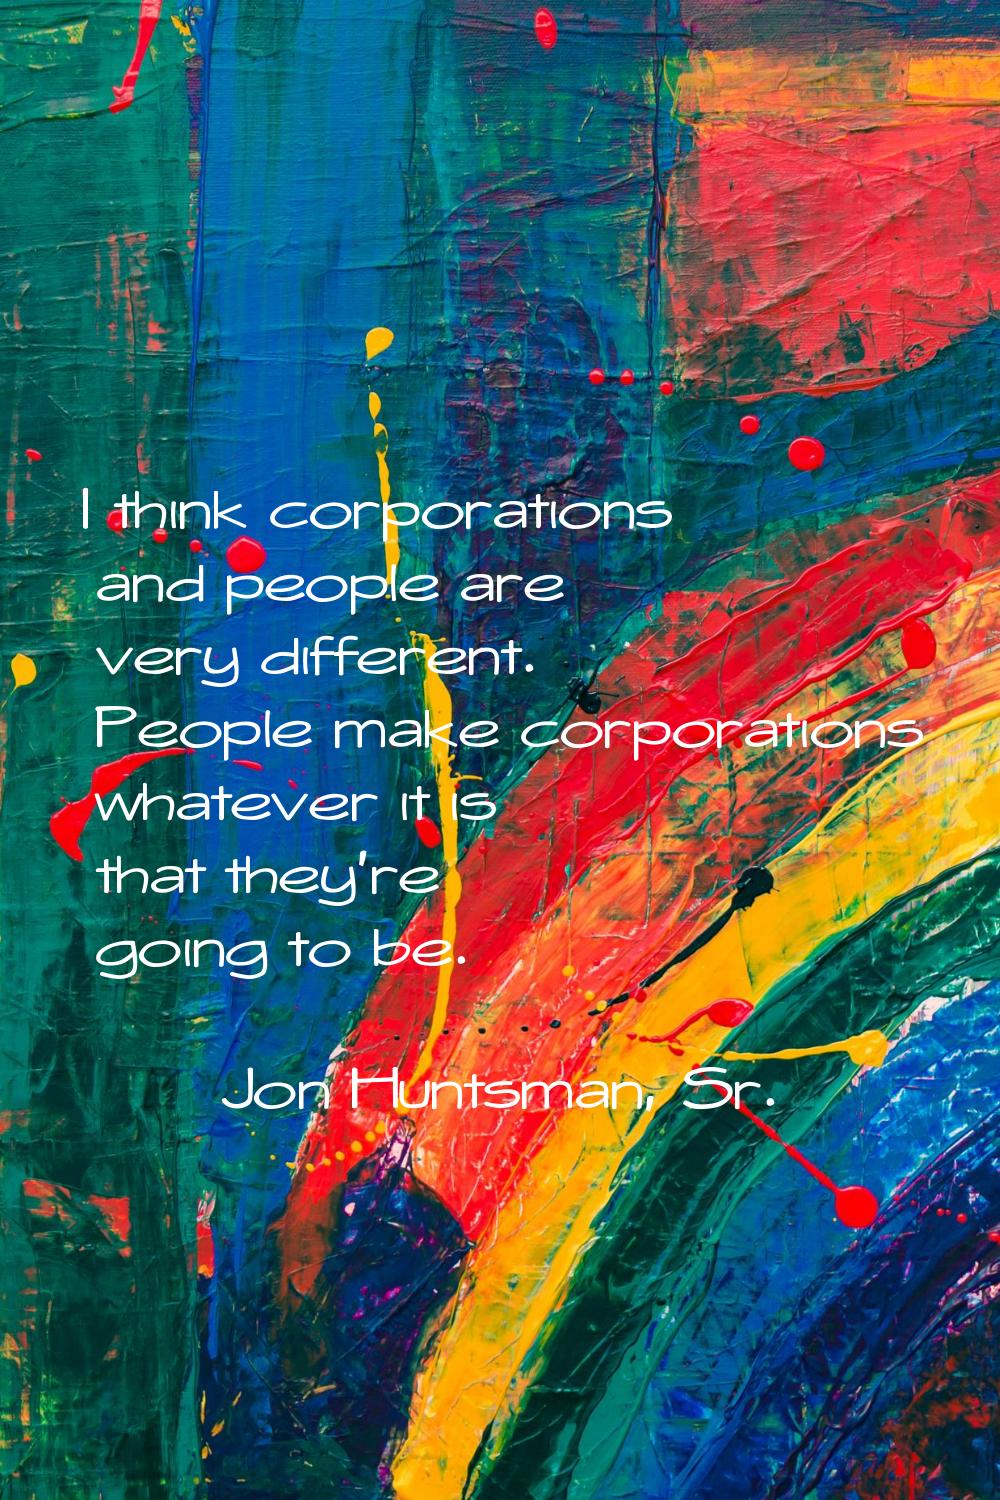 I think corporations and people are very different. People make corporations whatever it is that th